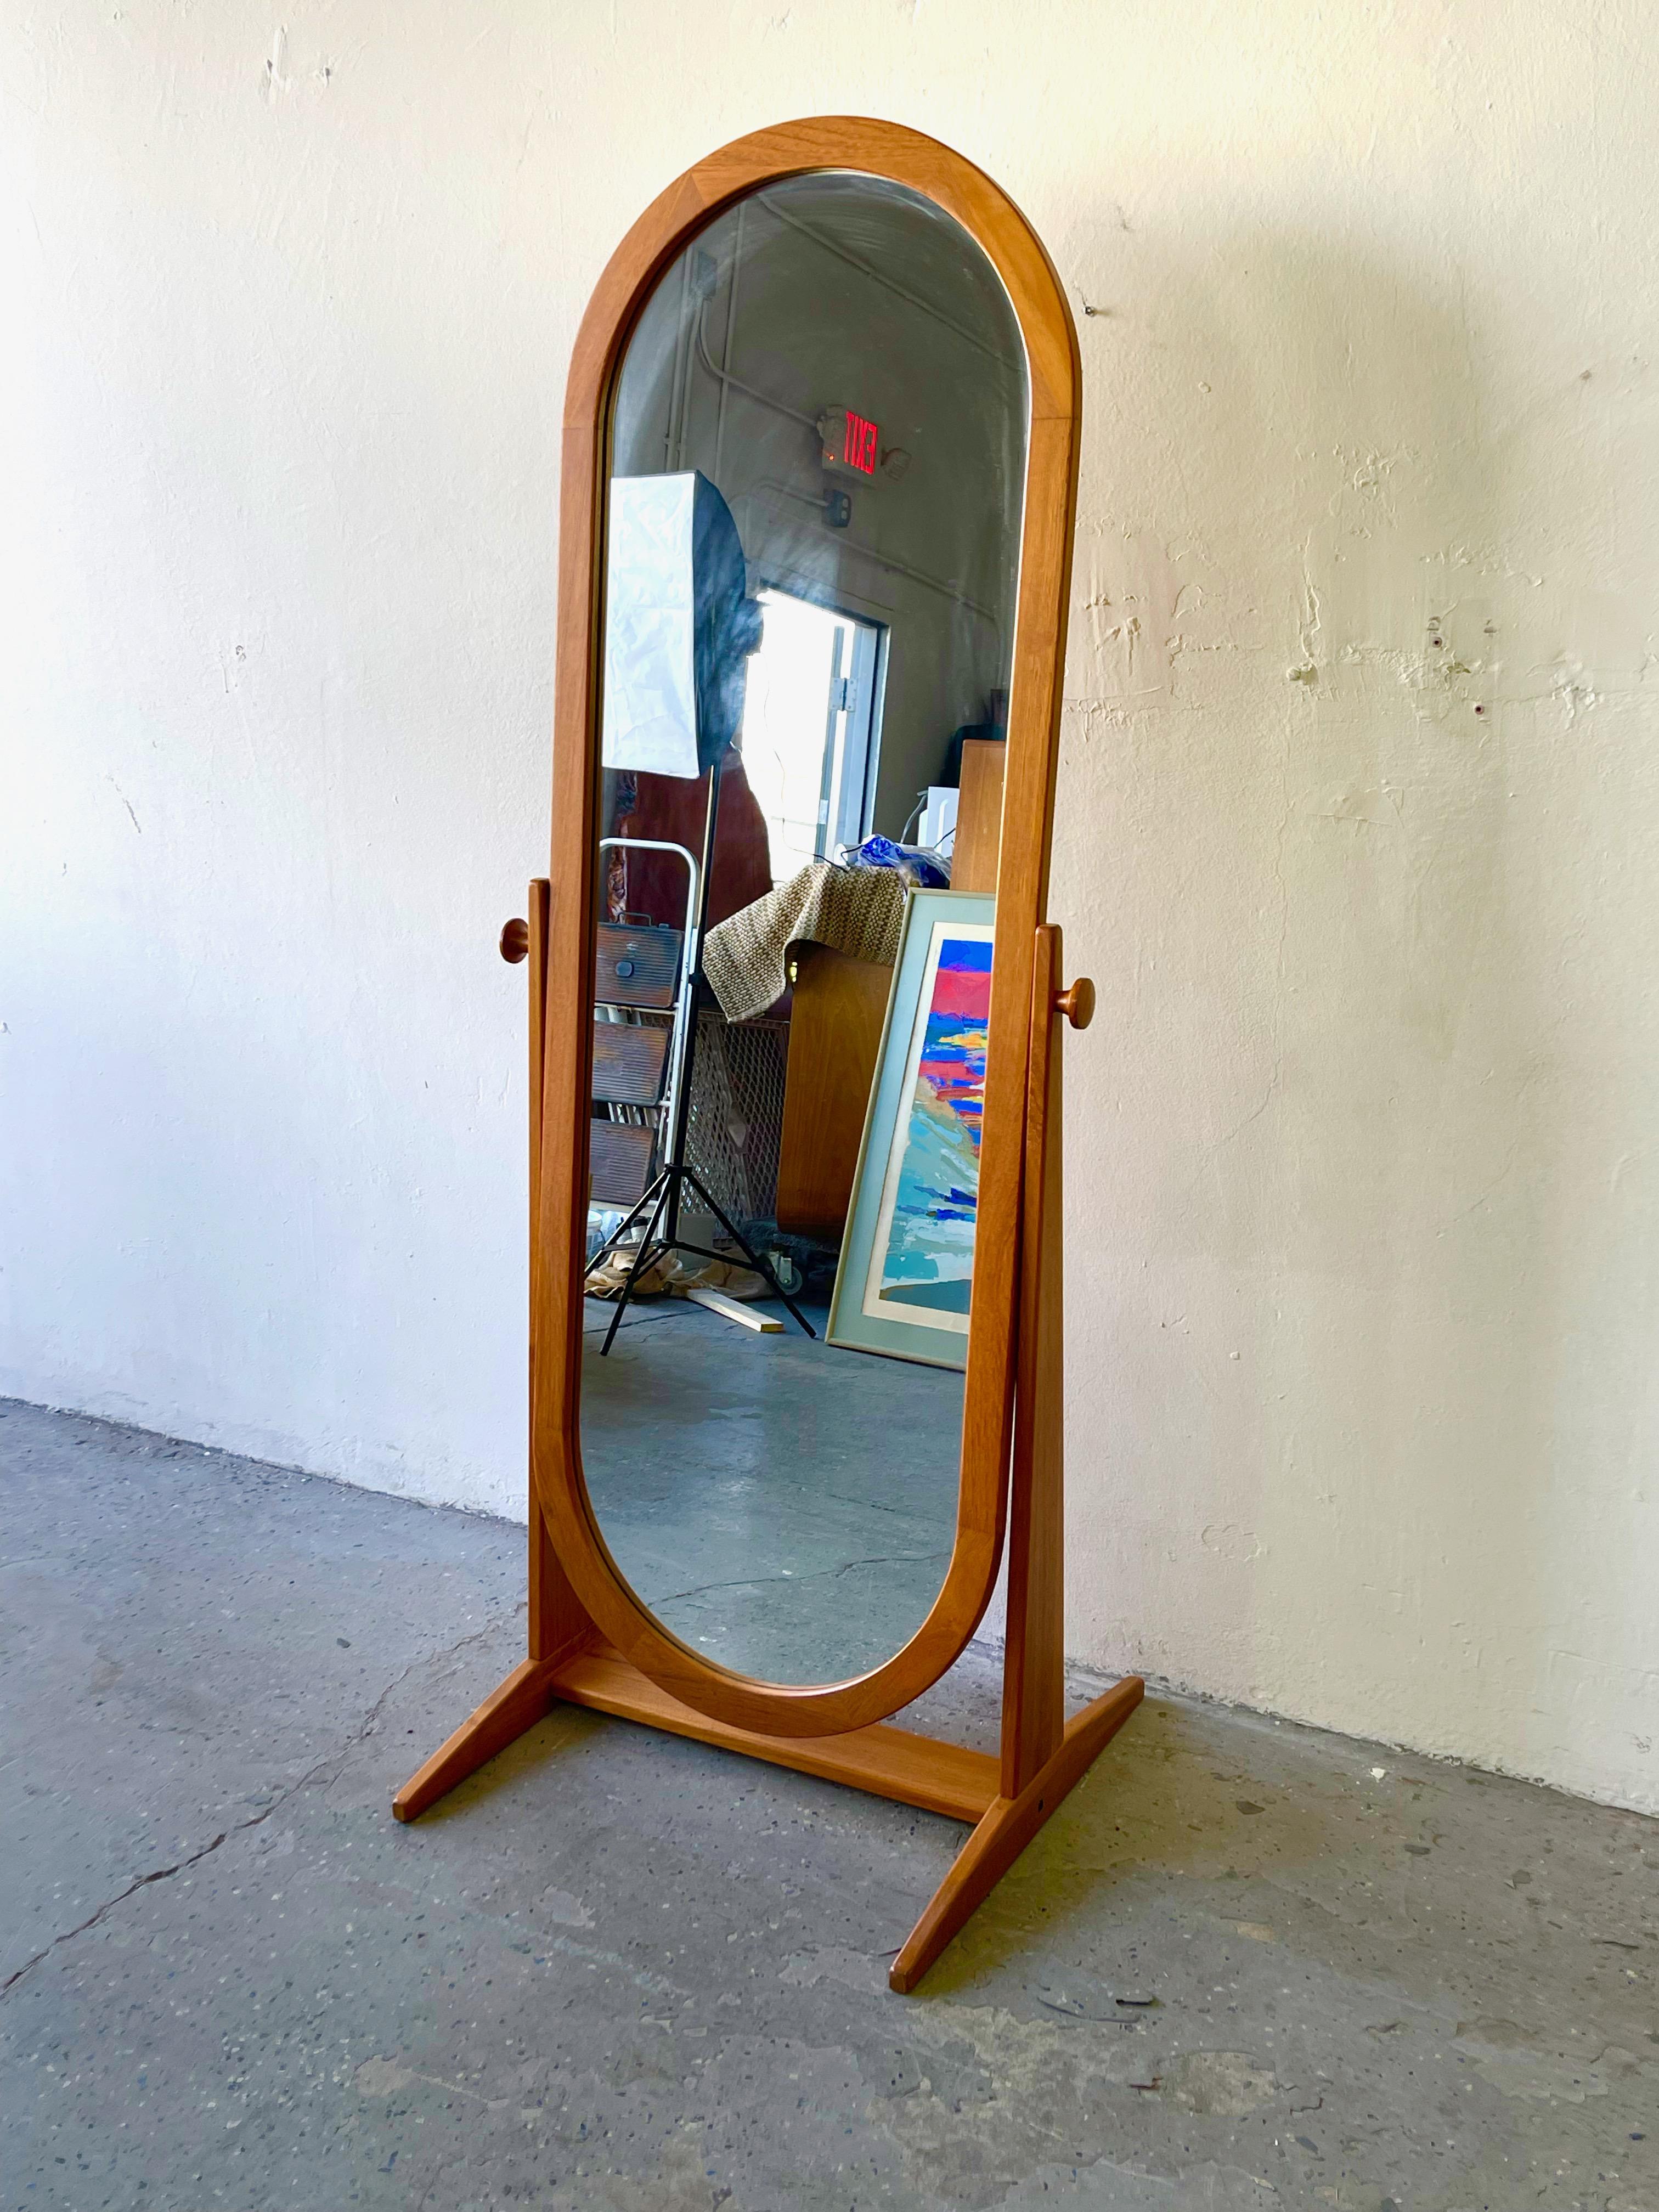 This full length floor mirror by Pedersen & Hansen Viby J Made in Denmark has an elongated oval shape that contrasts nicely with the angular frame. The mirror pivots to adjust the position, and it's held in place with turned teak knobs.

